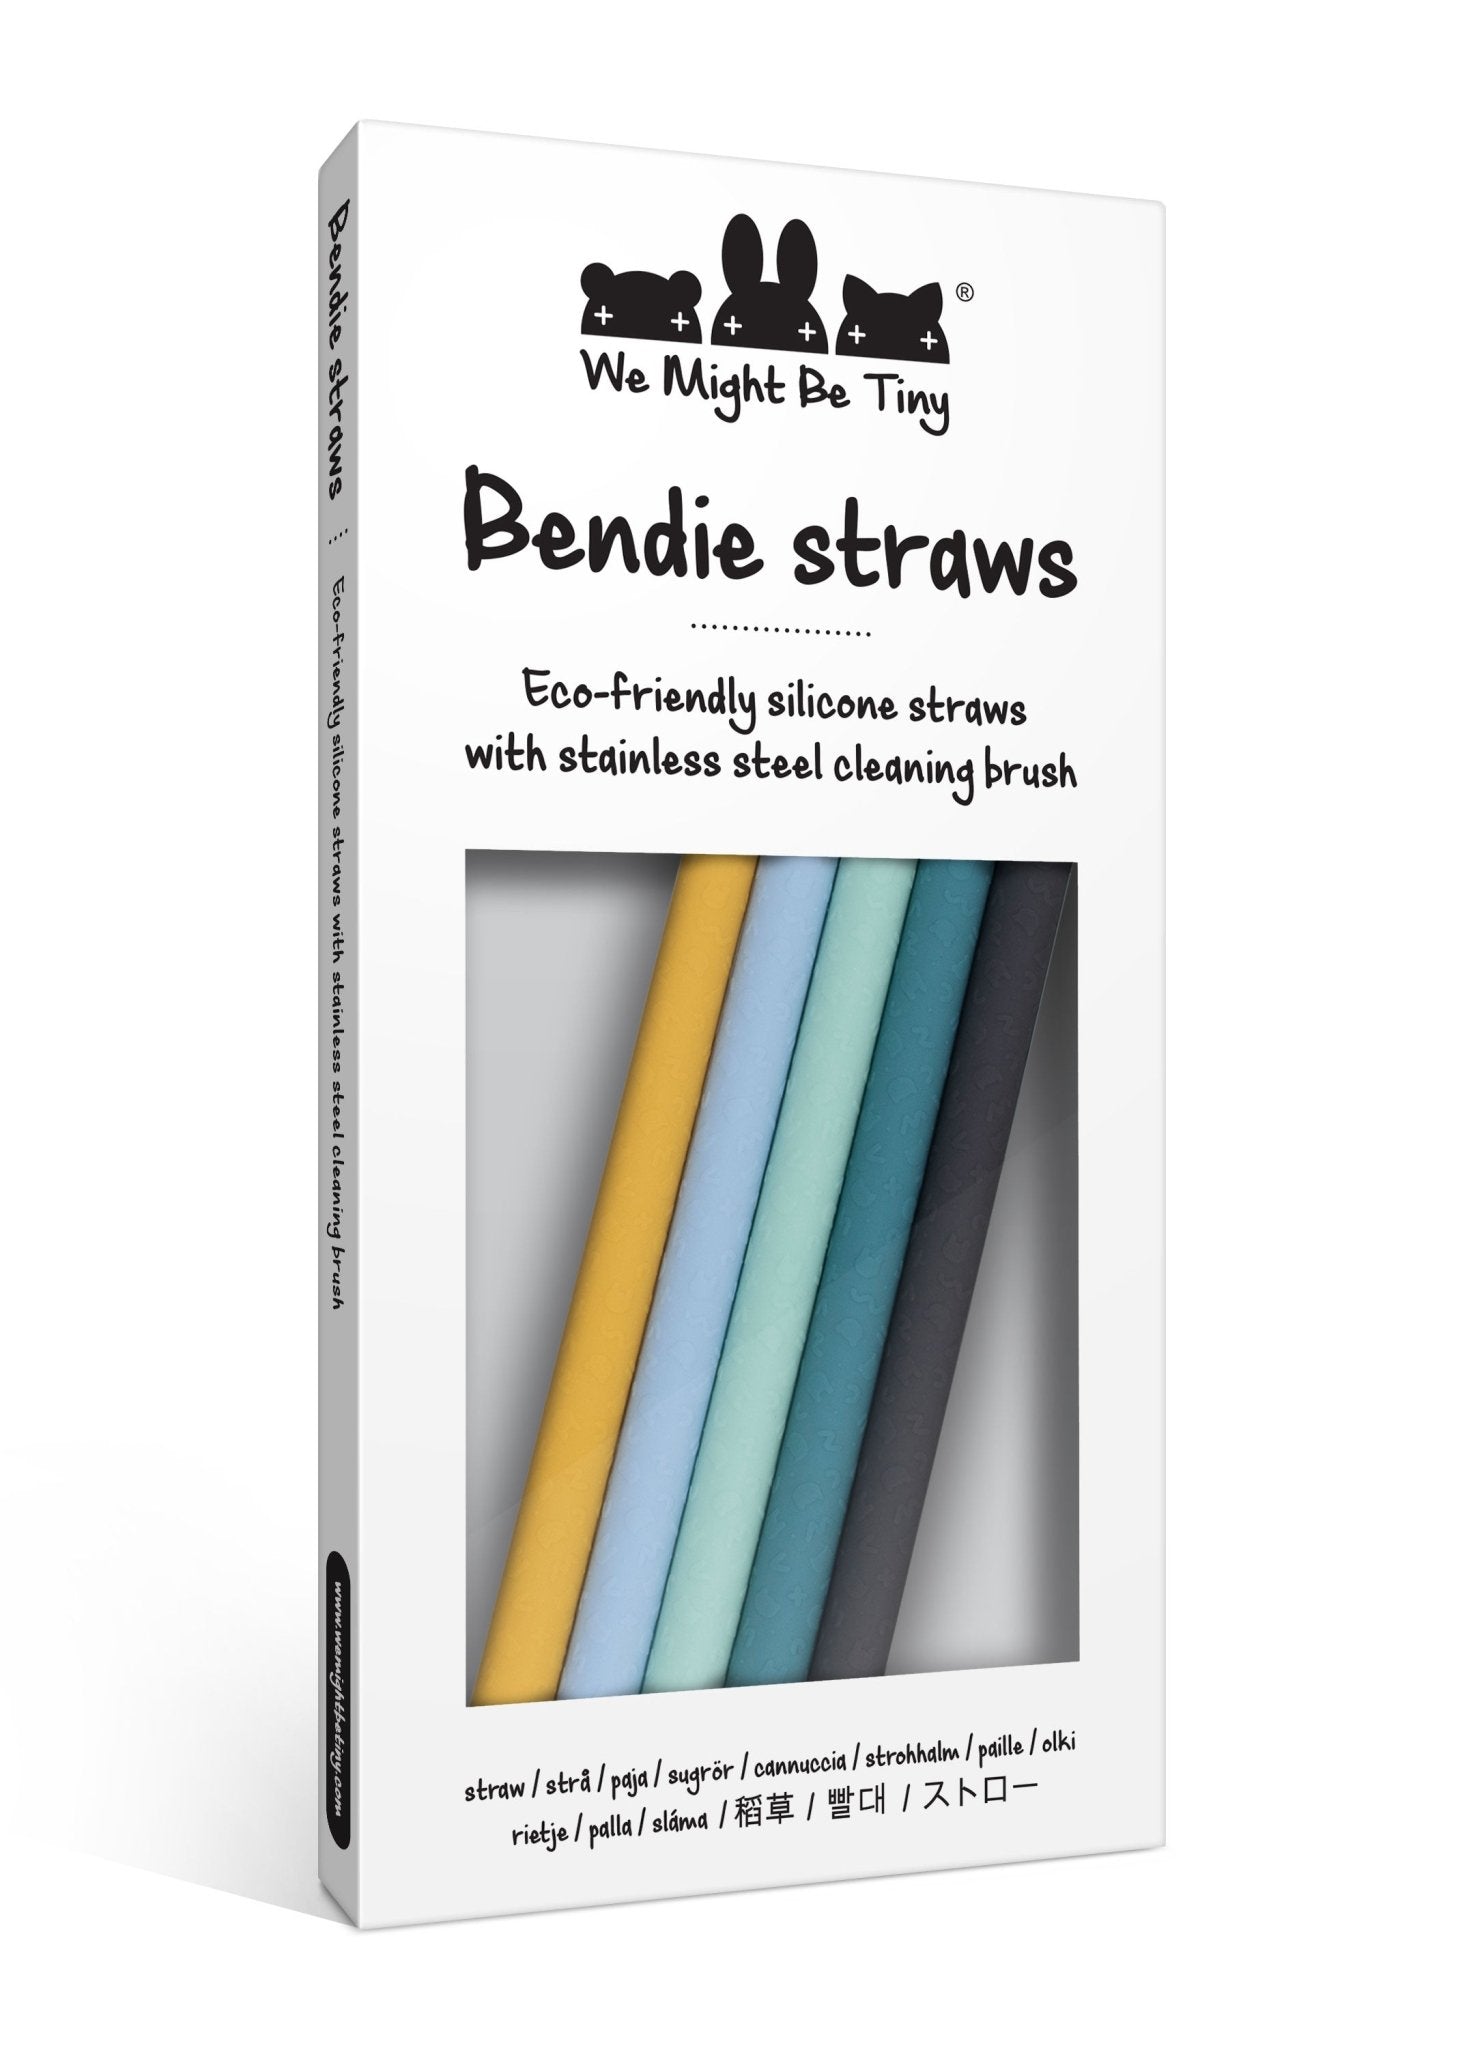 Packaged Silicone Bendie Straws by We Might Be Tiny